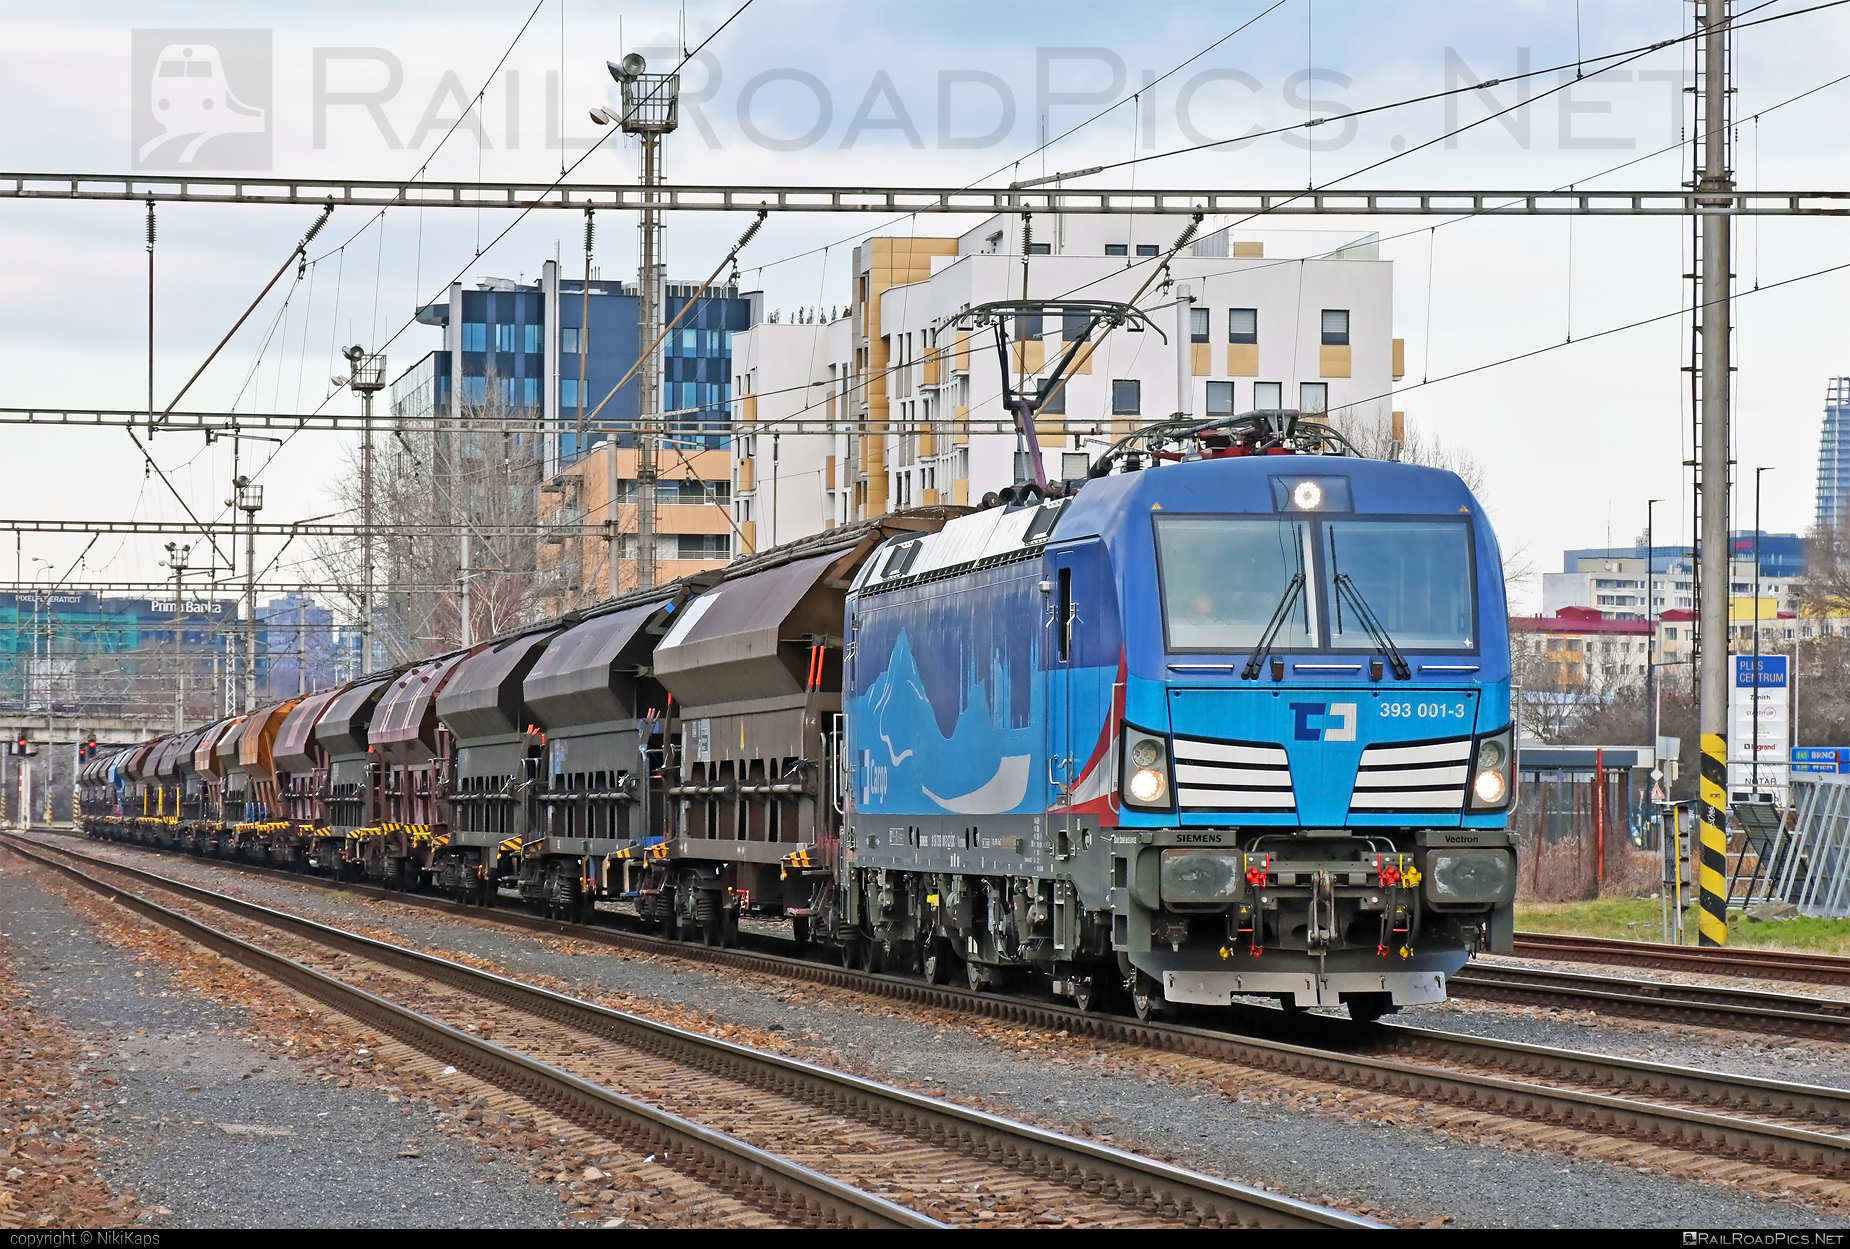 Siemens Vectron AC DPM - 393 001-3 operated by ČD Cargo, a.s. #cdcargo #hopperwagon #siemens #siemensVectron #siemensVectronACDPM #vectron #vectronACDPM